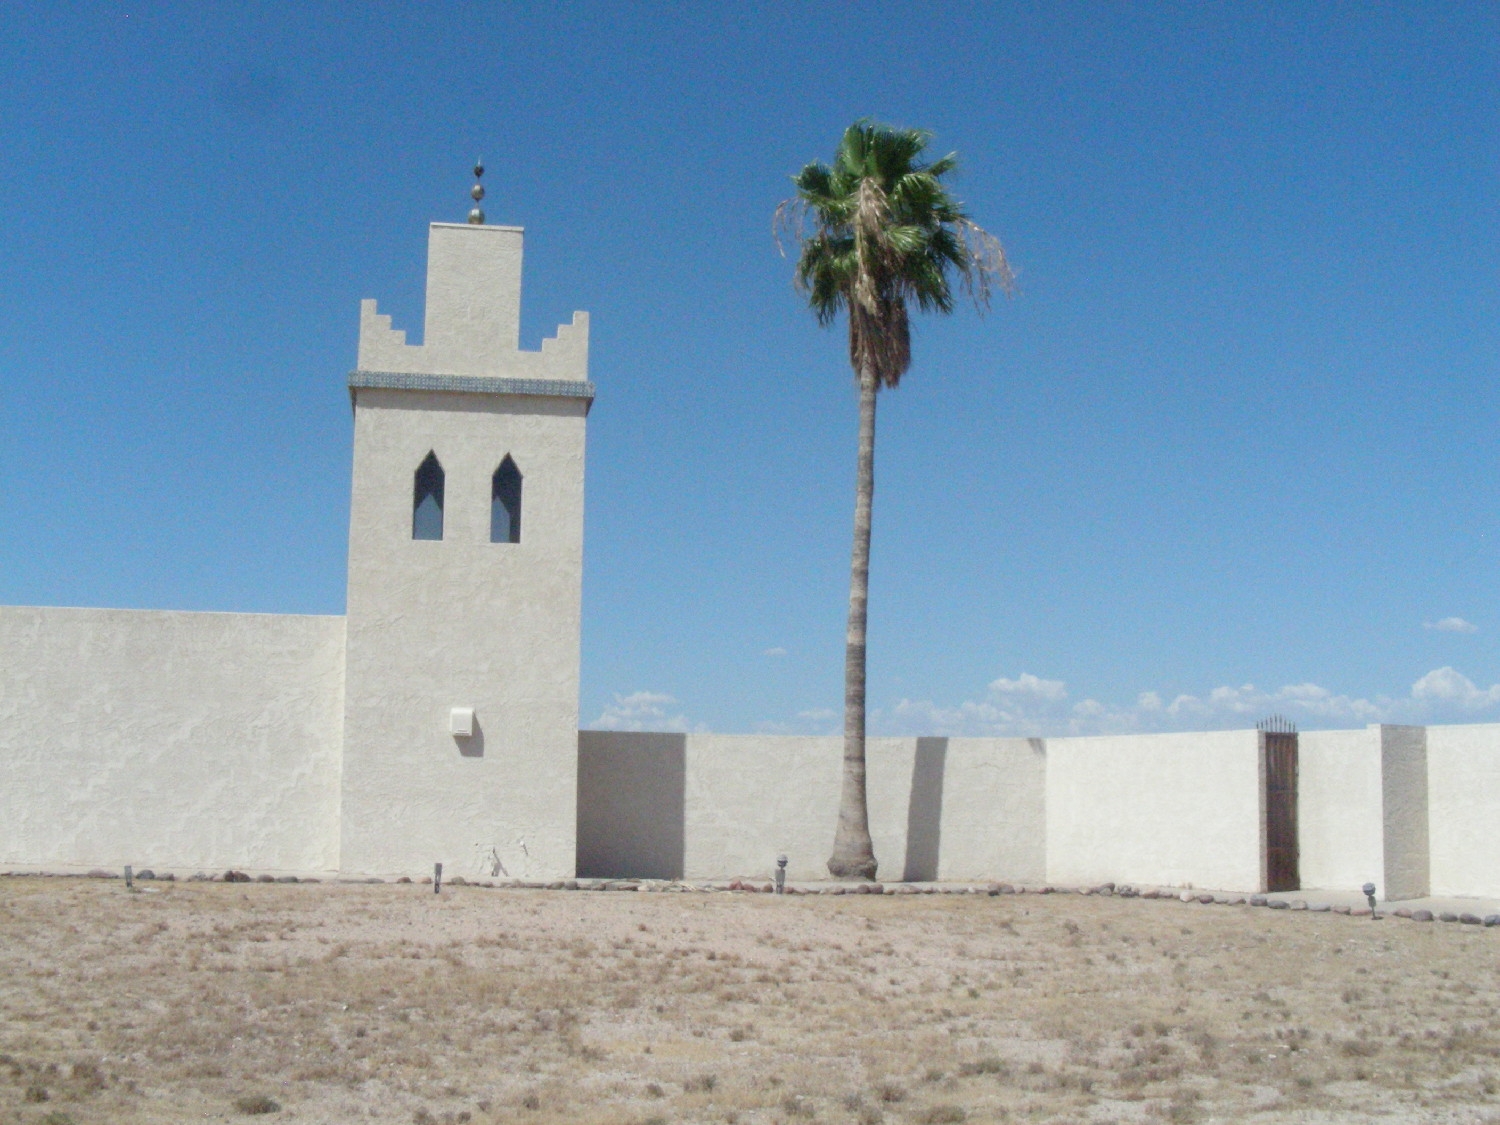 View of minaret and exterior courtyard walls